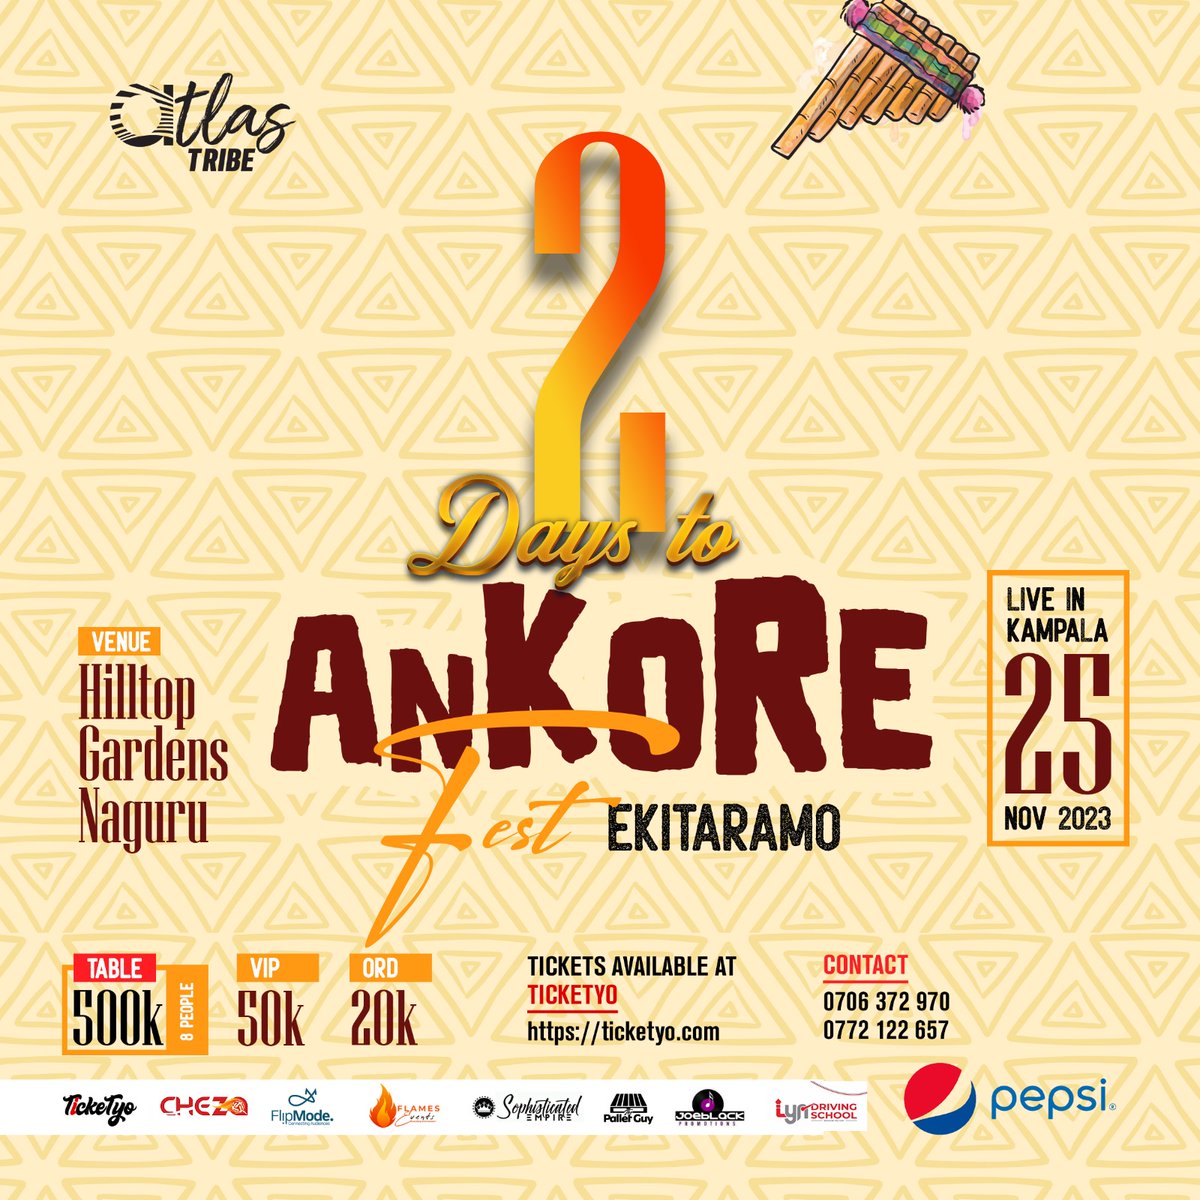 tell all your exs that on Saturday we go party😌

it's a Ekitaramo festival for you
#Ankolefest